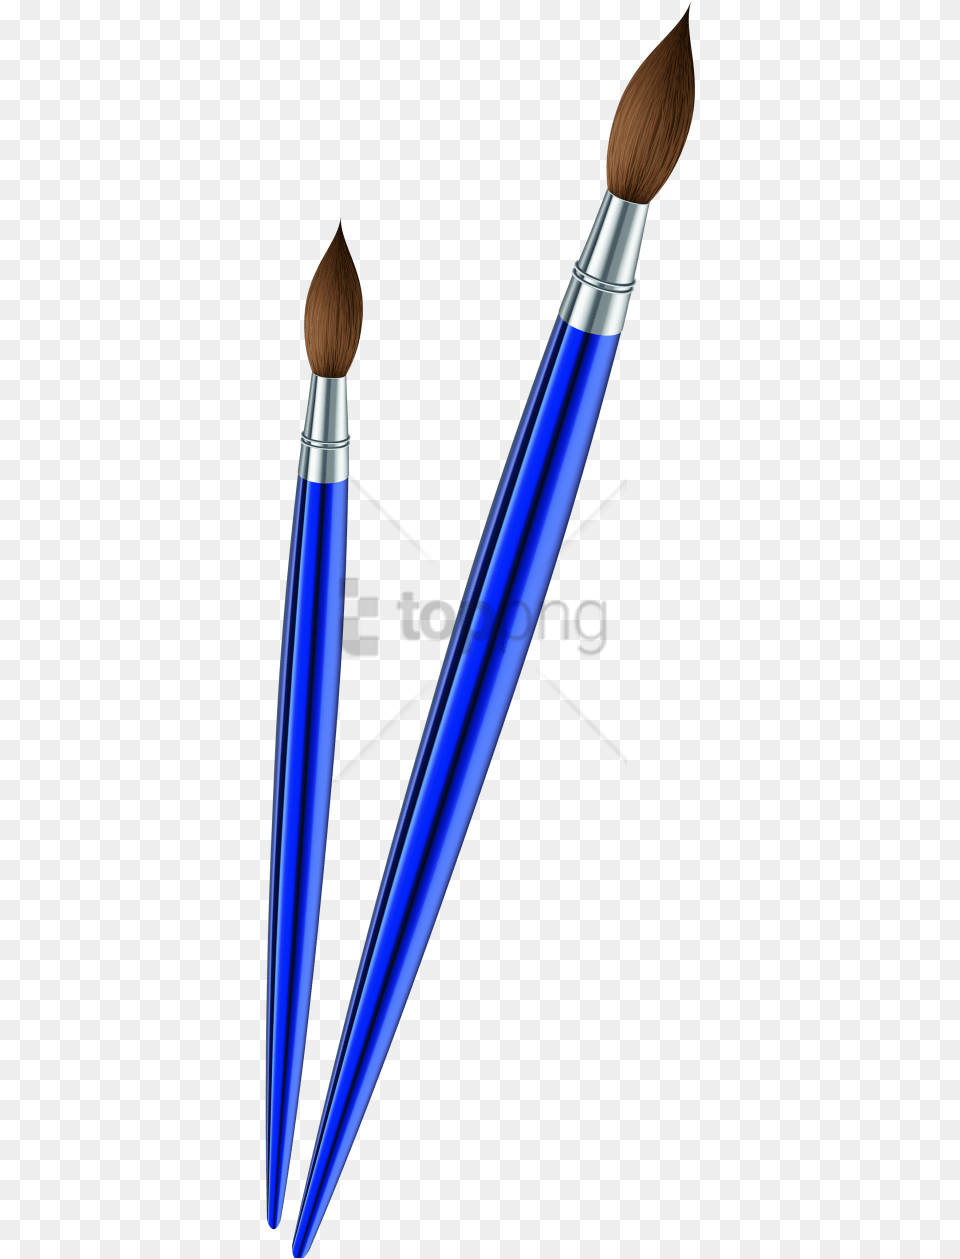 Paint Brush Clip Art Image With Transparent Paint Brush Transparent Background, Device, Tool Png